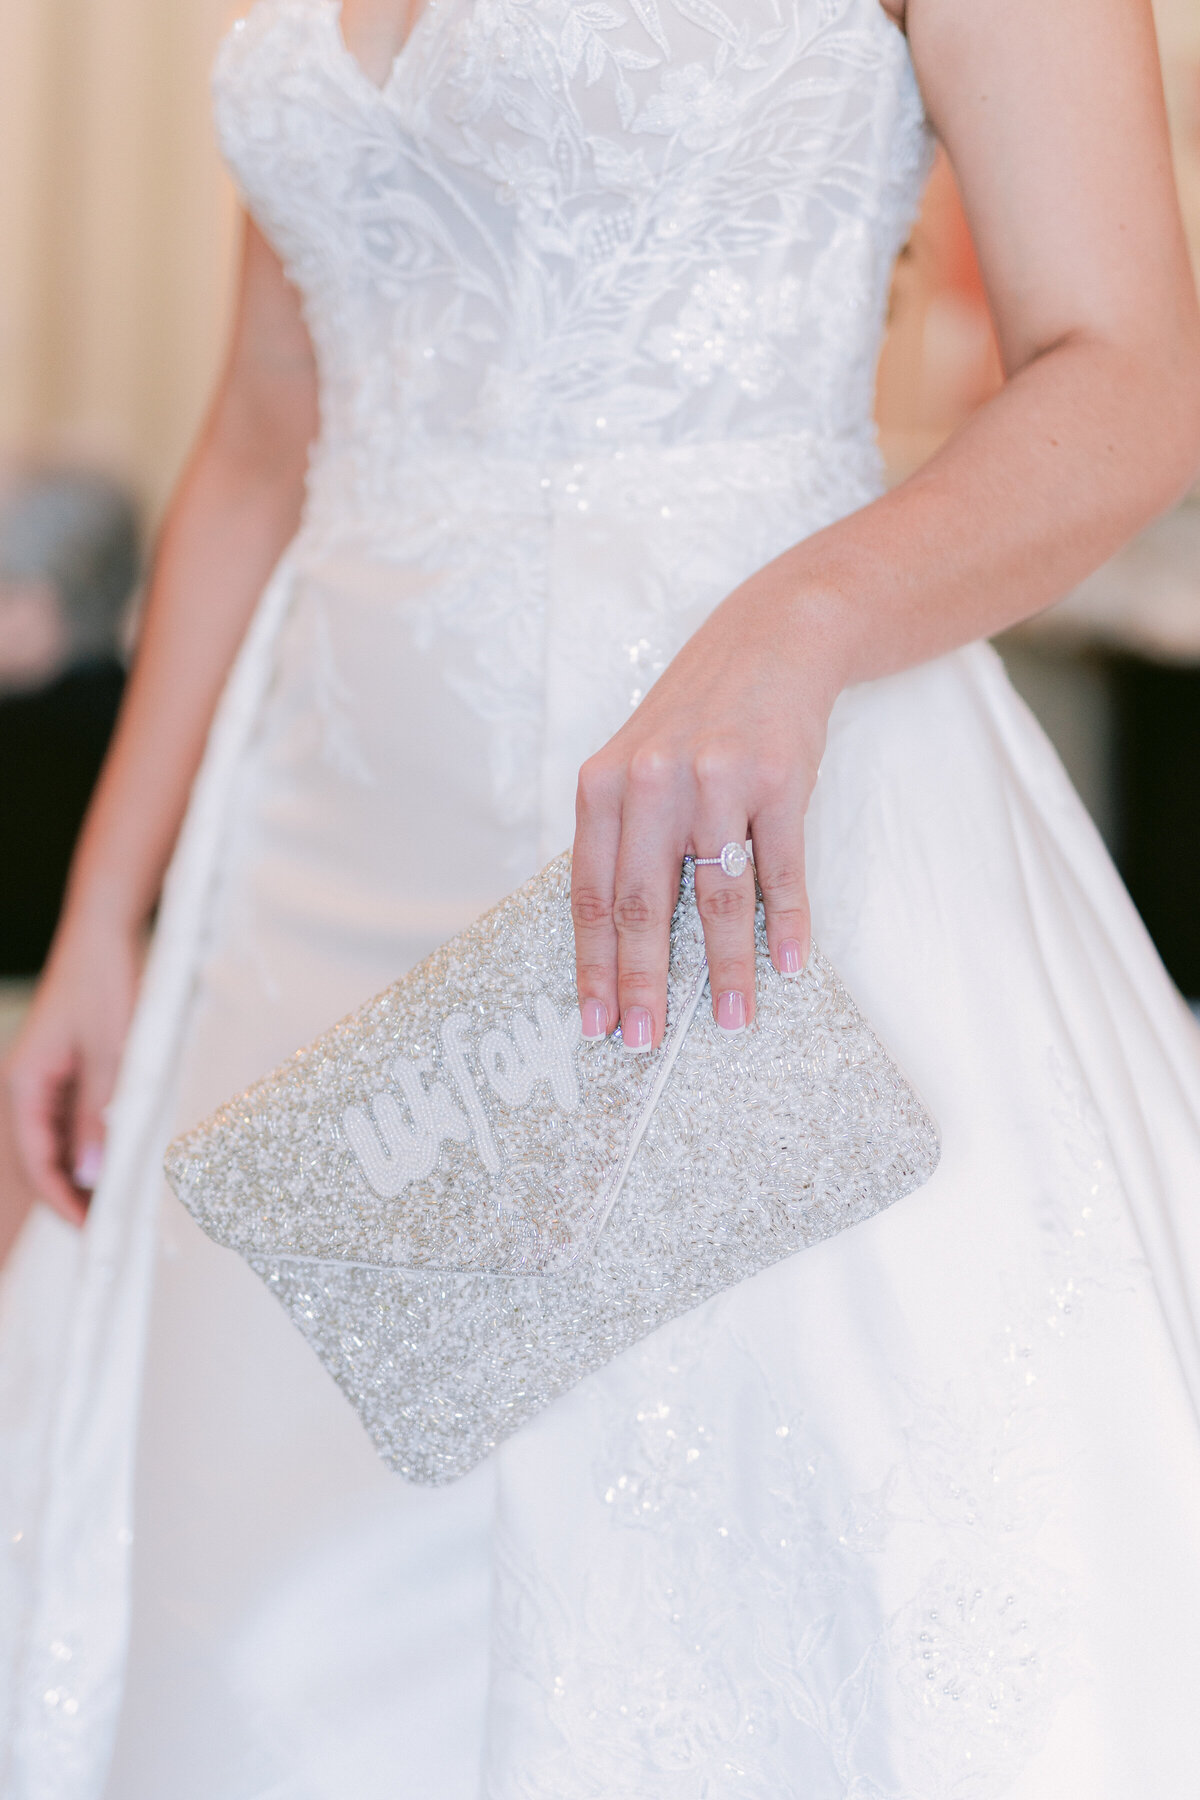 Bride holding clutch bag ready for wedding at the Olana in Dallas